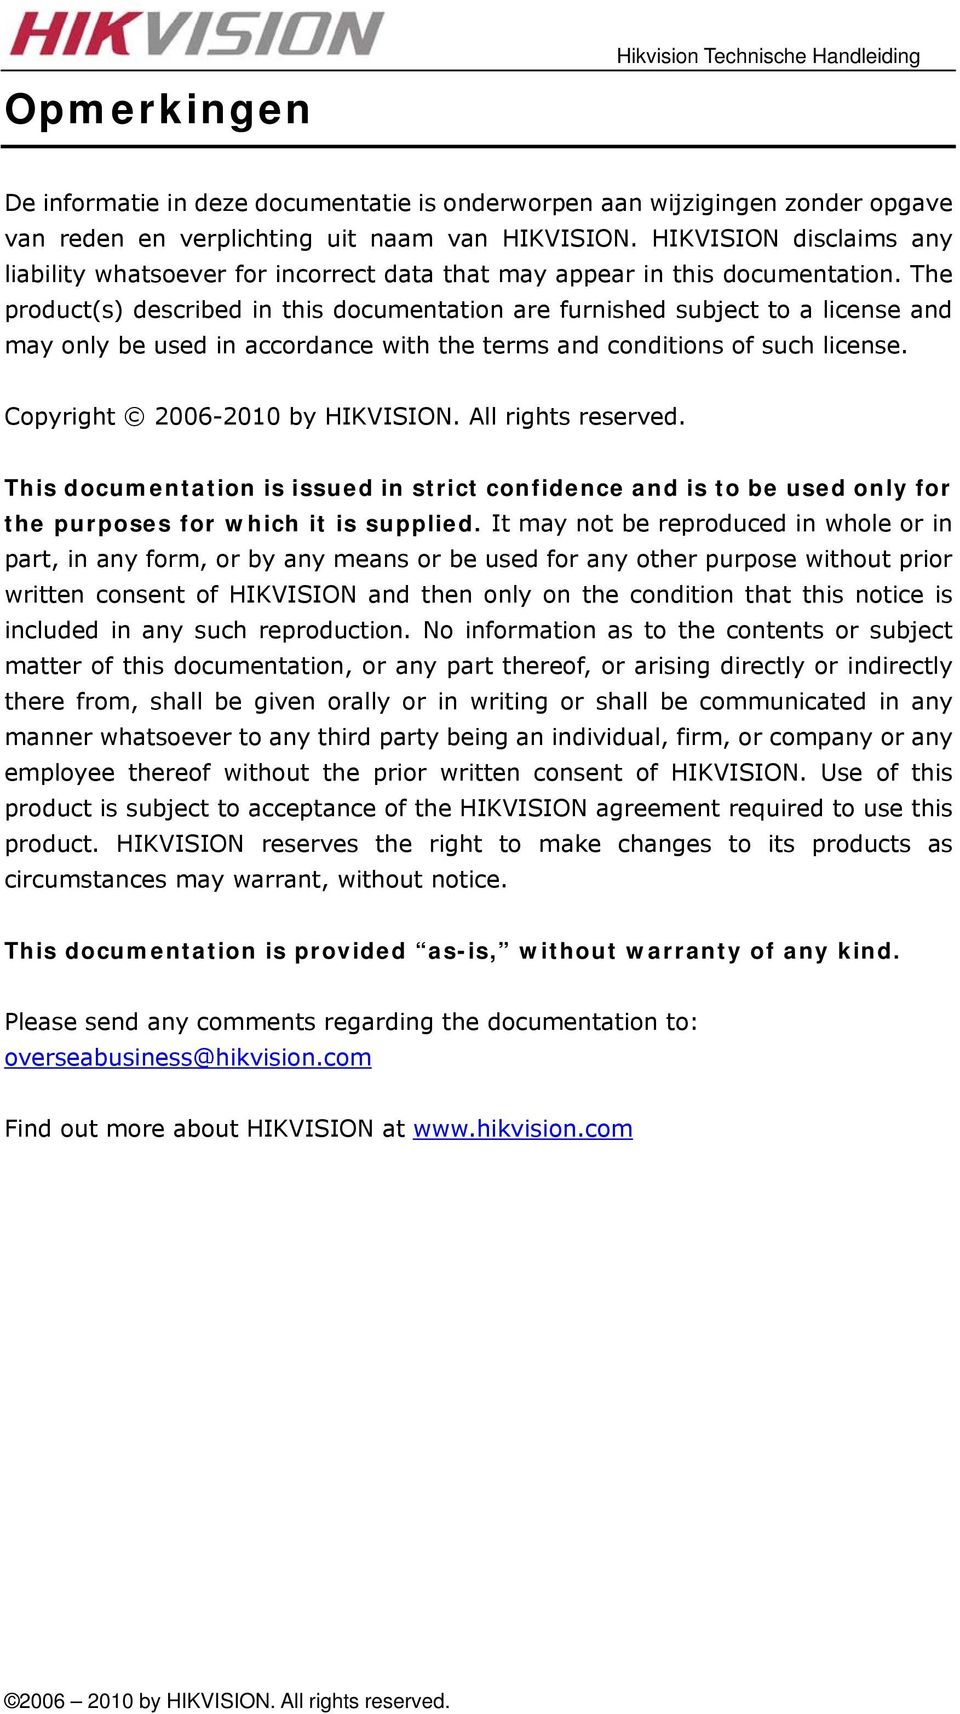 The product(s) described in this documentation are furnished subject to a license and may only be used in accordance with the terms and conditions of such license. Copyright 2006-2010 by HIKVISION.